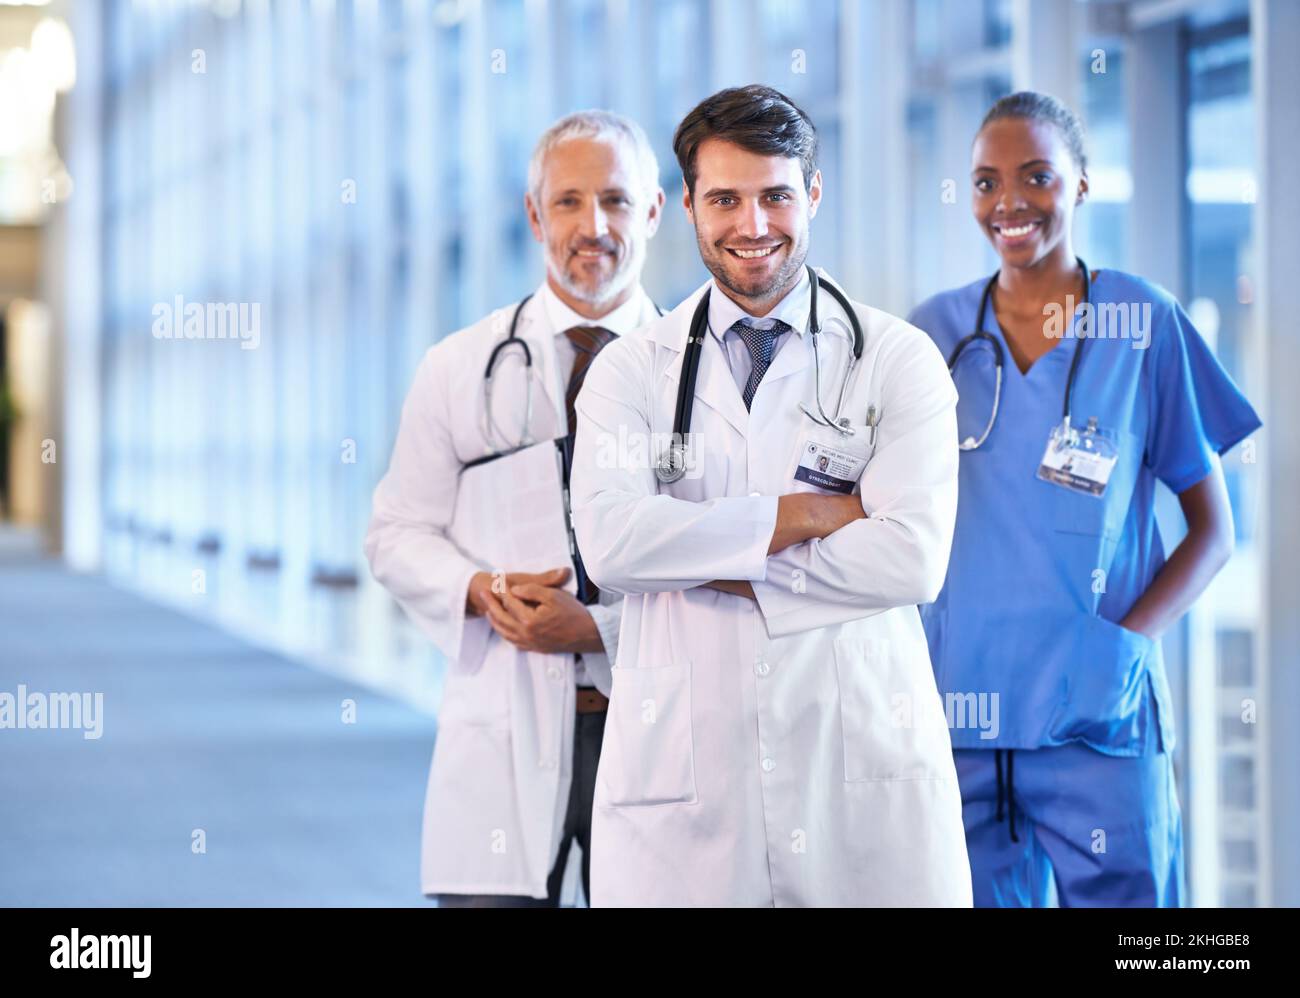 The team to get you back on track. A medical team standing in the hospital corridor. Stock Photo